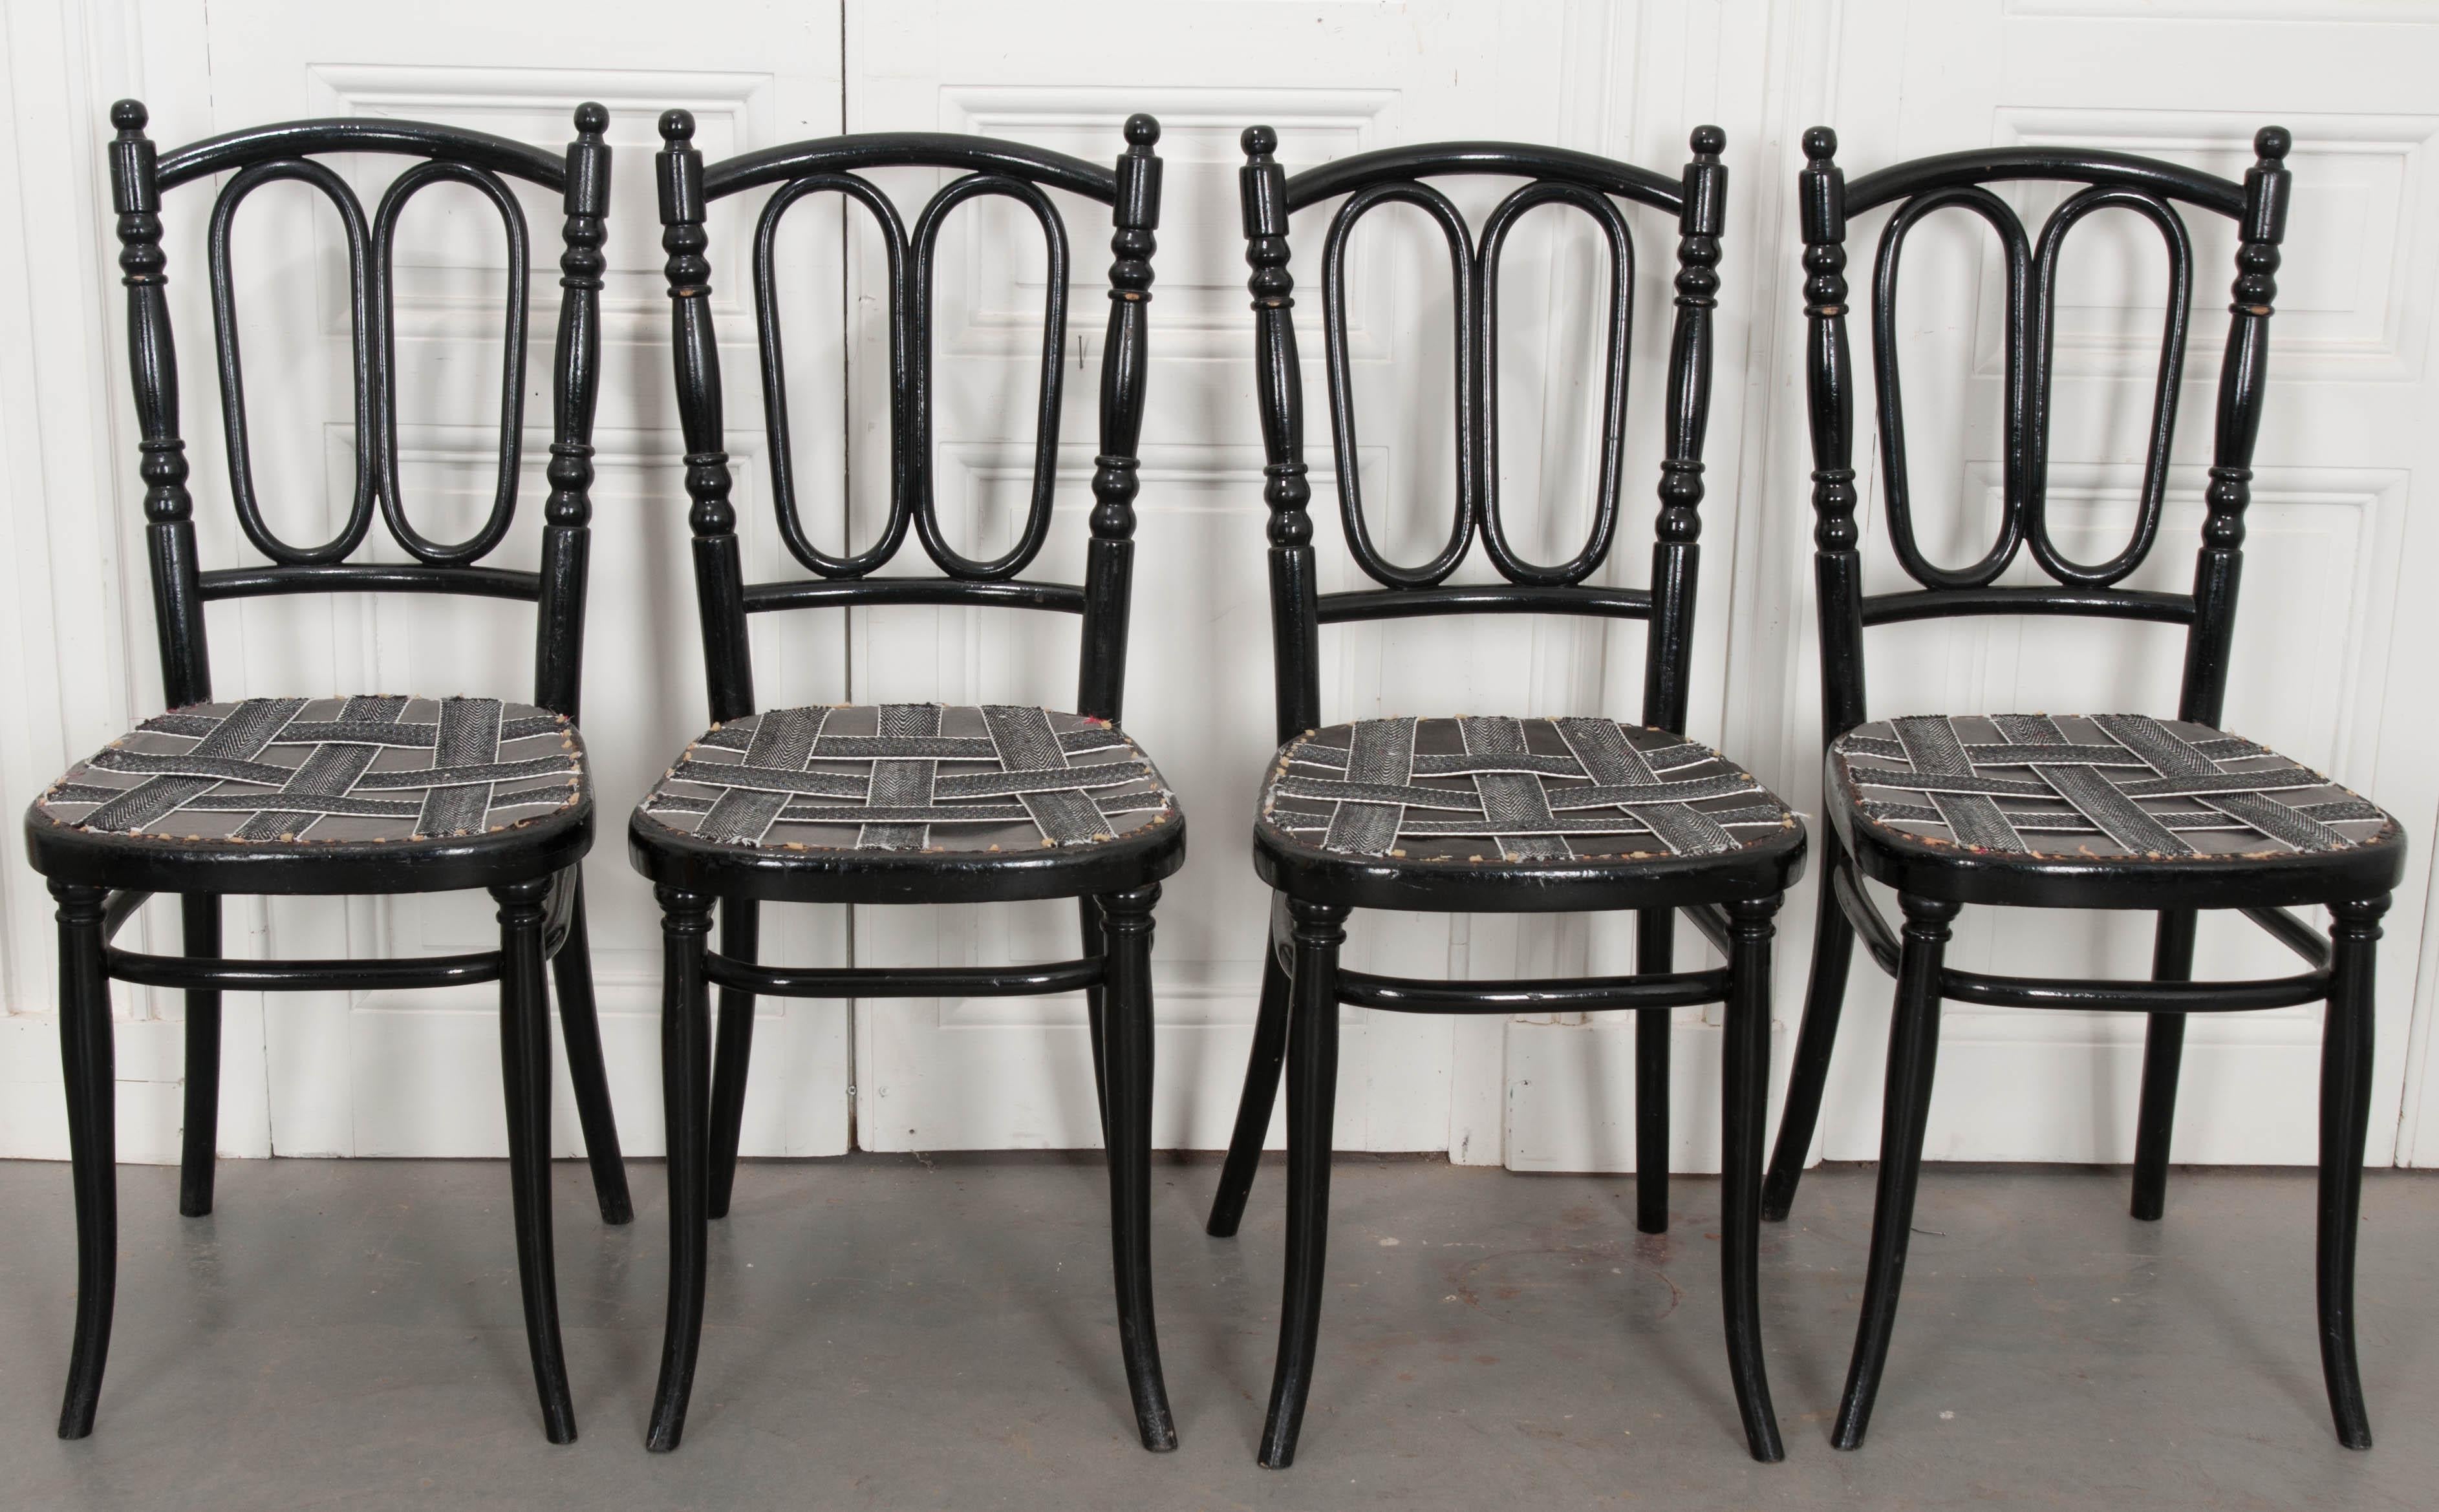 A superb set of four ebonized bentwood side chairs, c. 1900, by Michael Thonet. Thonet is credited for creating the iconic bentwood chair. He was a German-Austrian cabinet/furniture maker and to this day, his progeny still runs the business. This